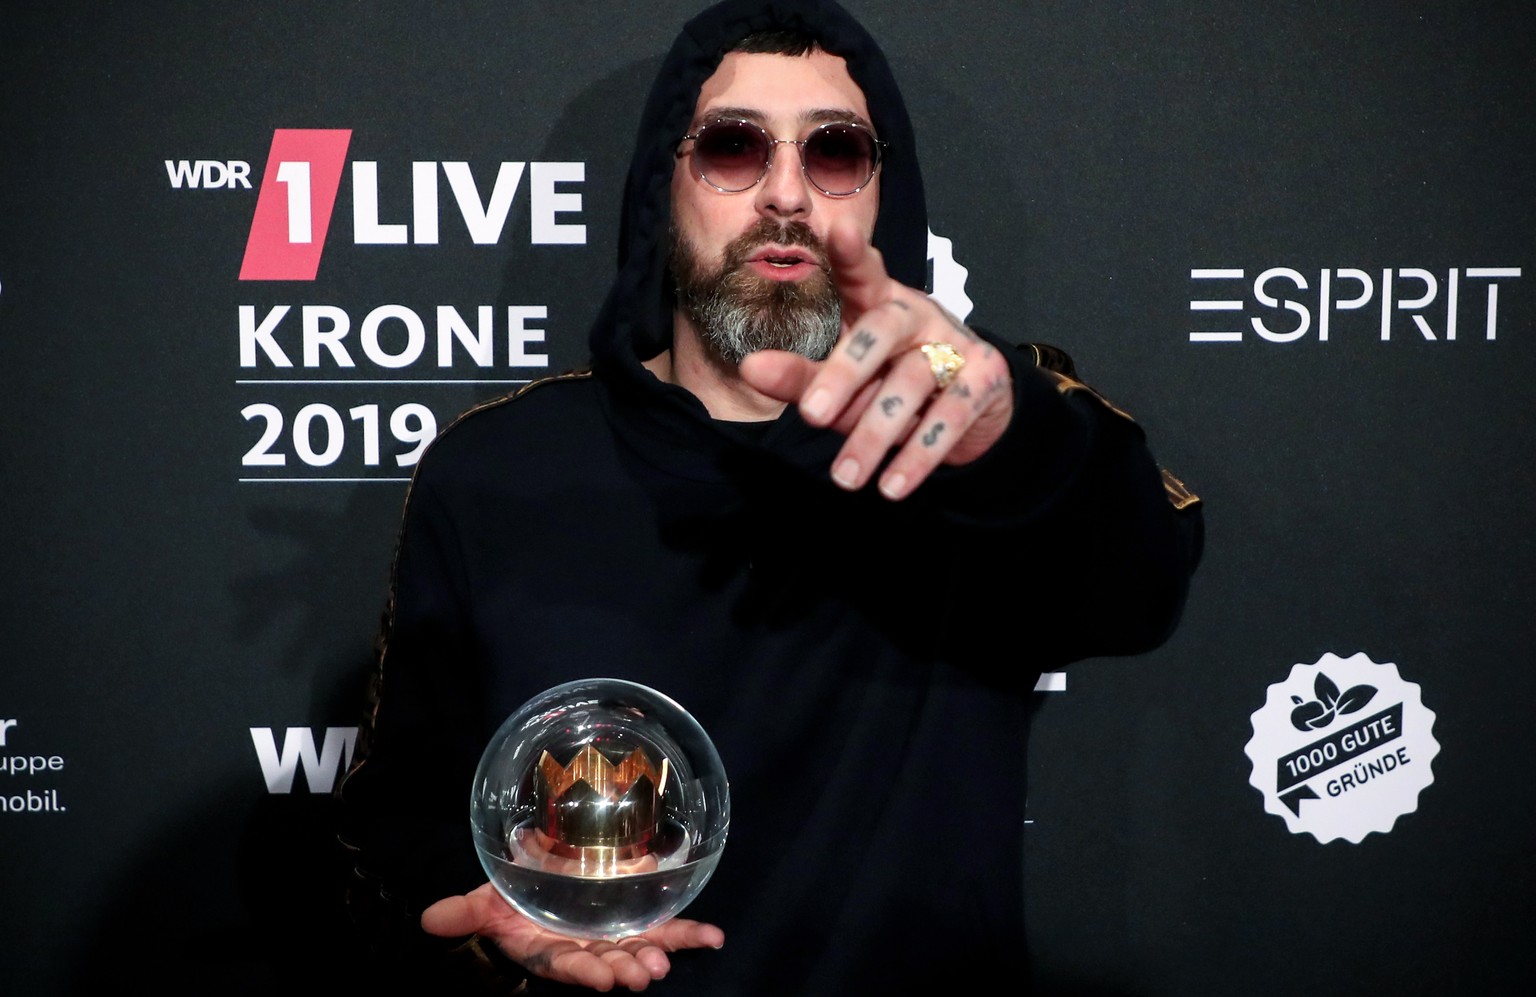 epa08047669 German rapper, actor and music producer SIDO poses with his trophy after the 20th 1LIVE Krone radio awards ceremony at the Jahrhunderthalle in Bochum, Germany, 05 December 2019. The radio  ...